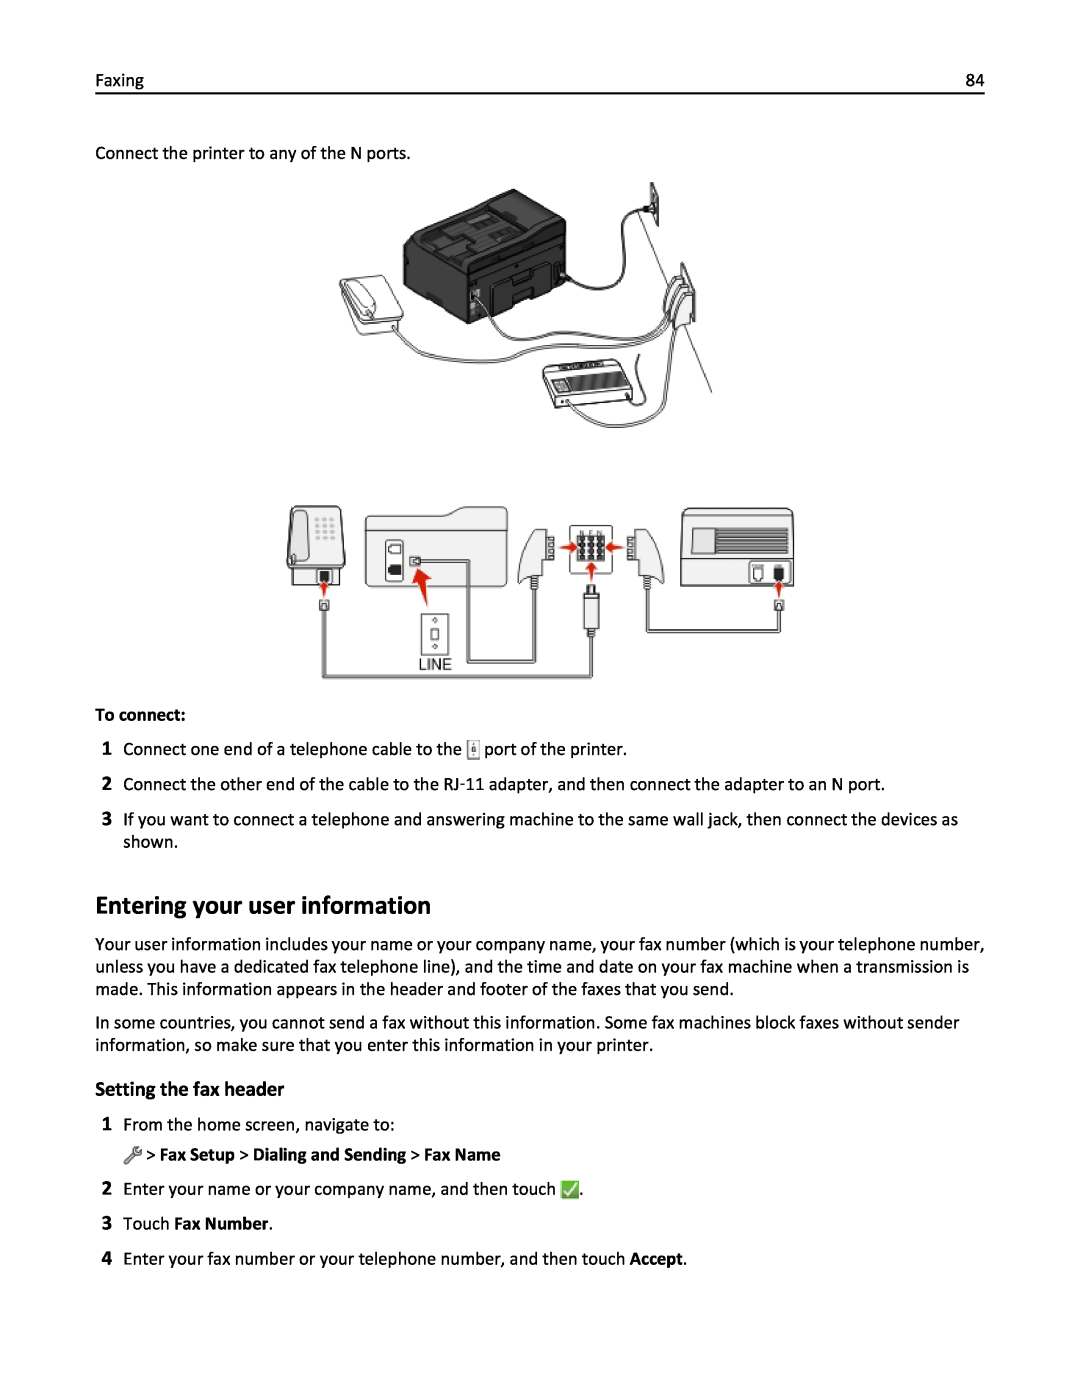 Lexmark 20E, 200 manual Entering your user information, Setting the fax header, To connect, Touch Fax Number 